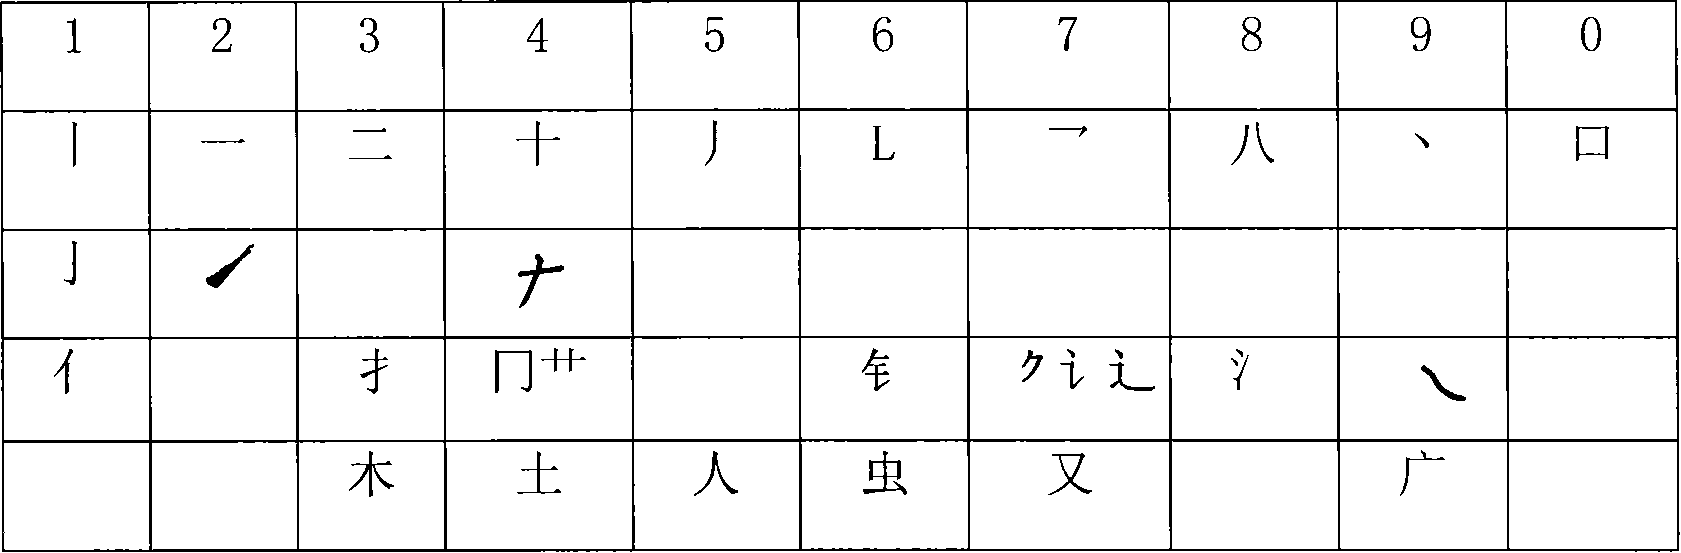 Pictograph digit code Chinese character retrieving and input method